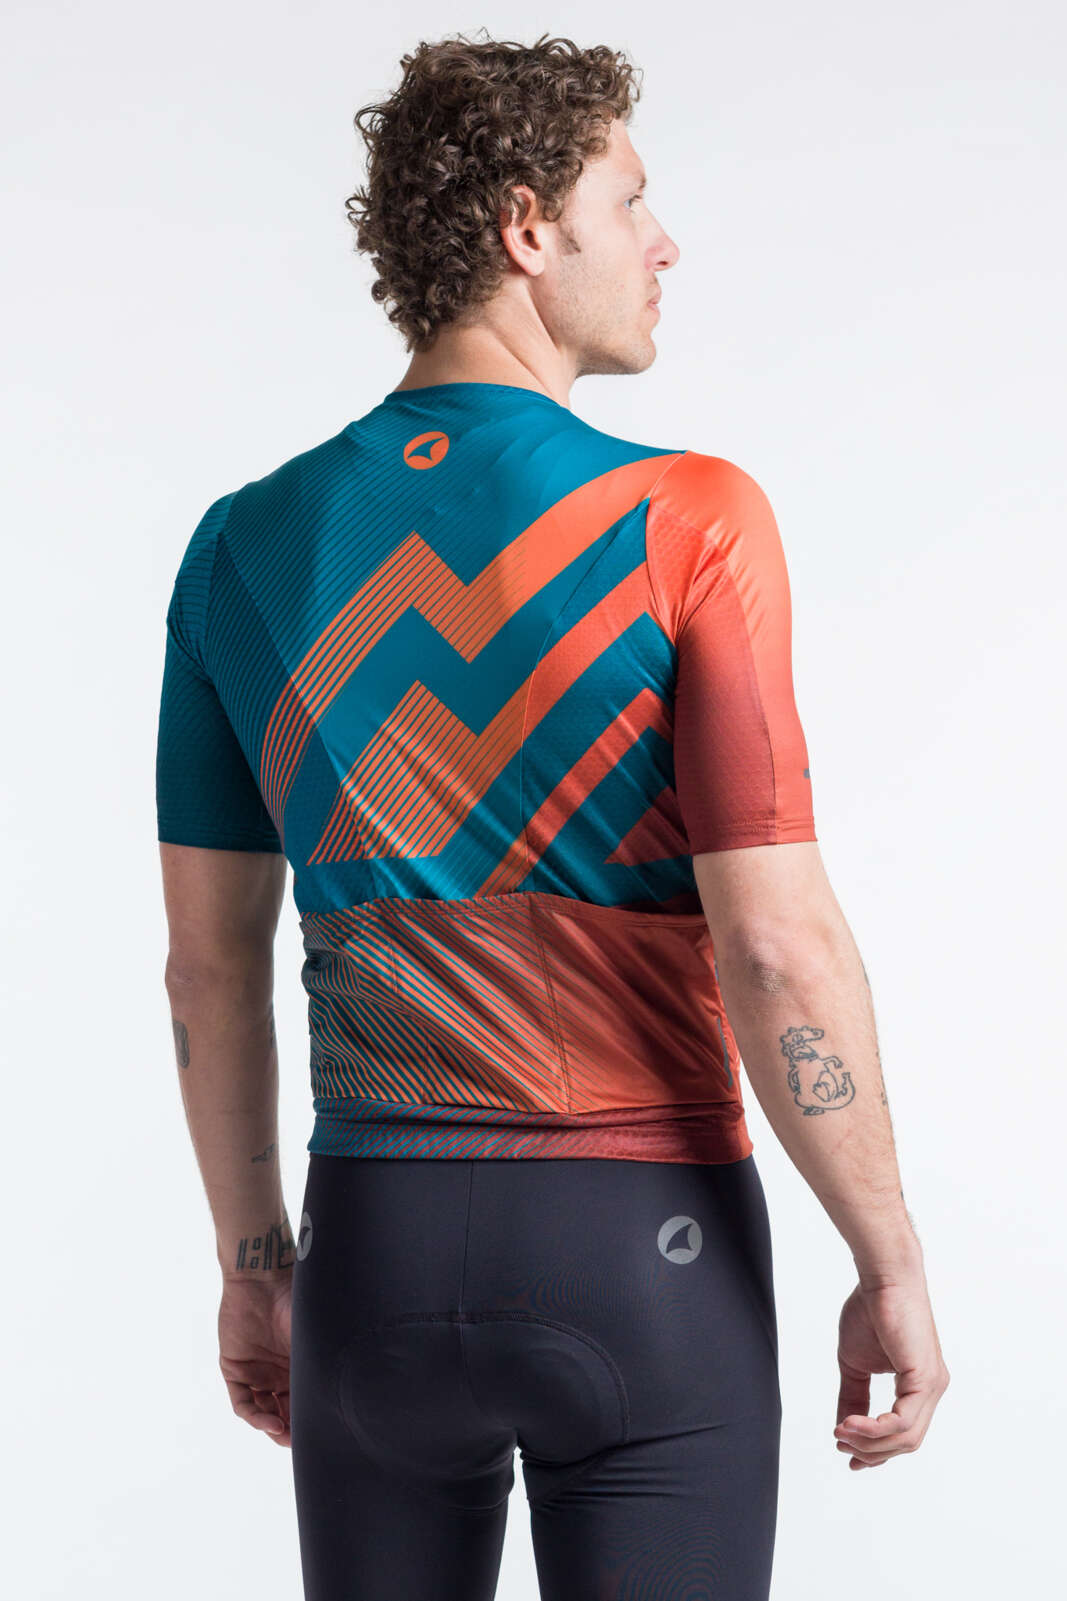 Men's Best Cycling Jersey - Summit Pitch Teal & Orange Back View